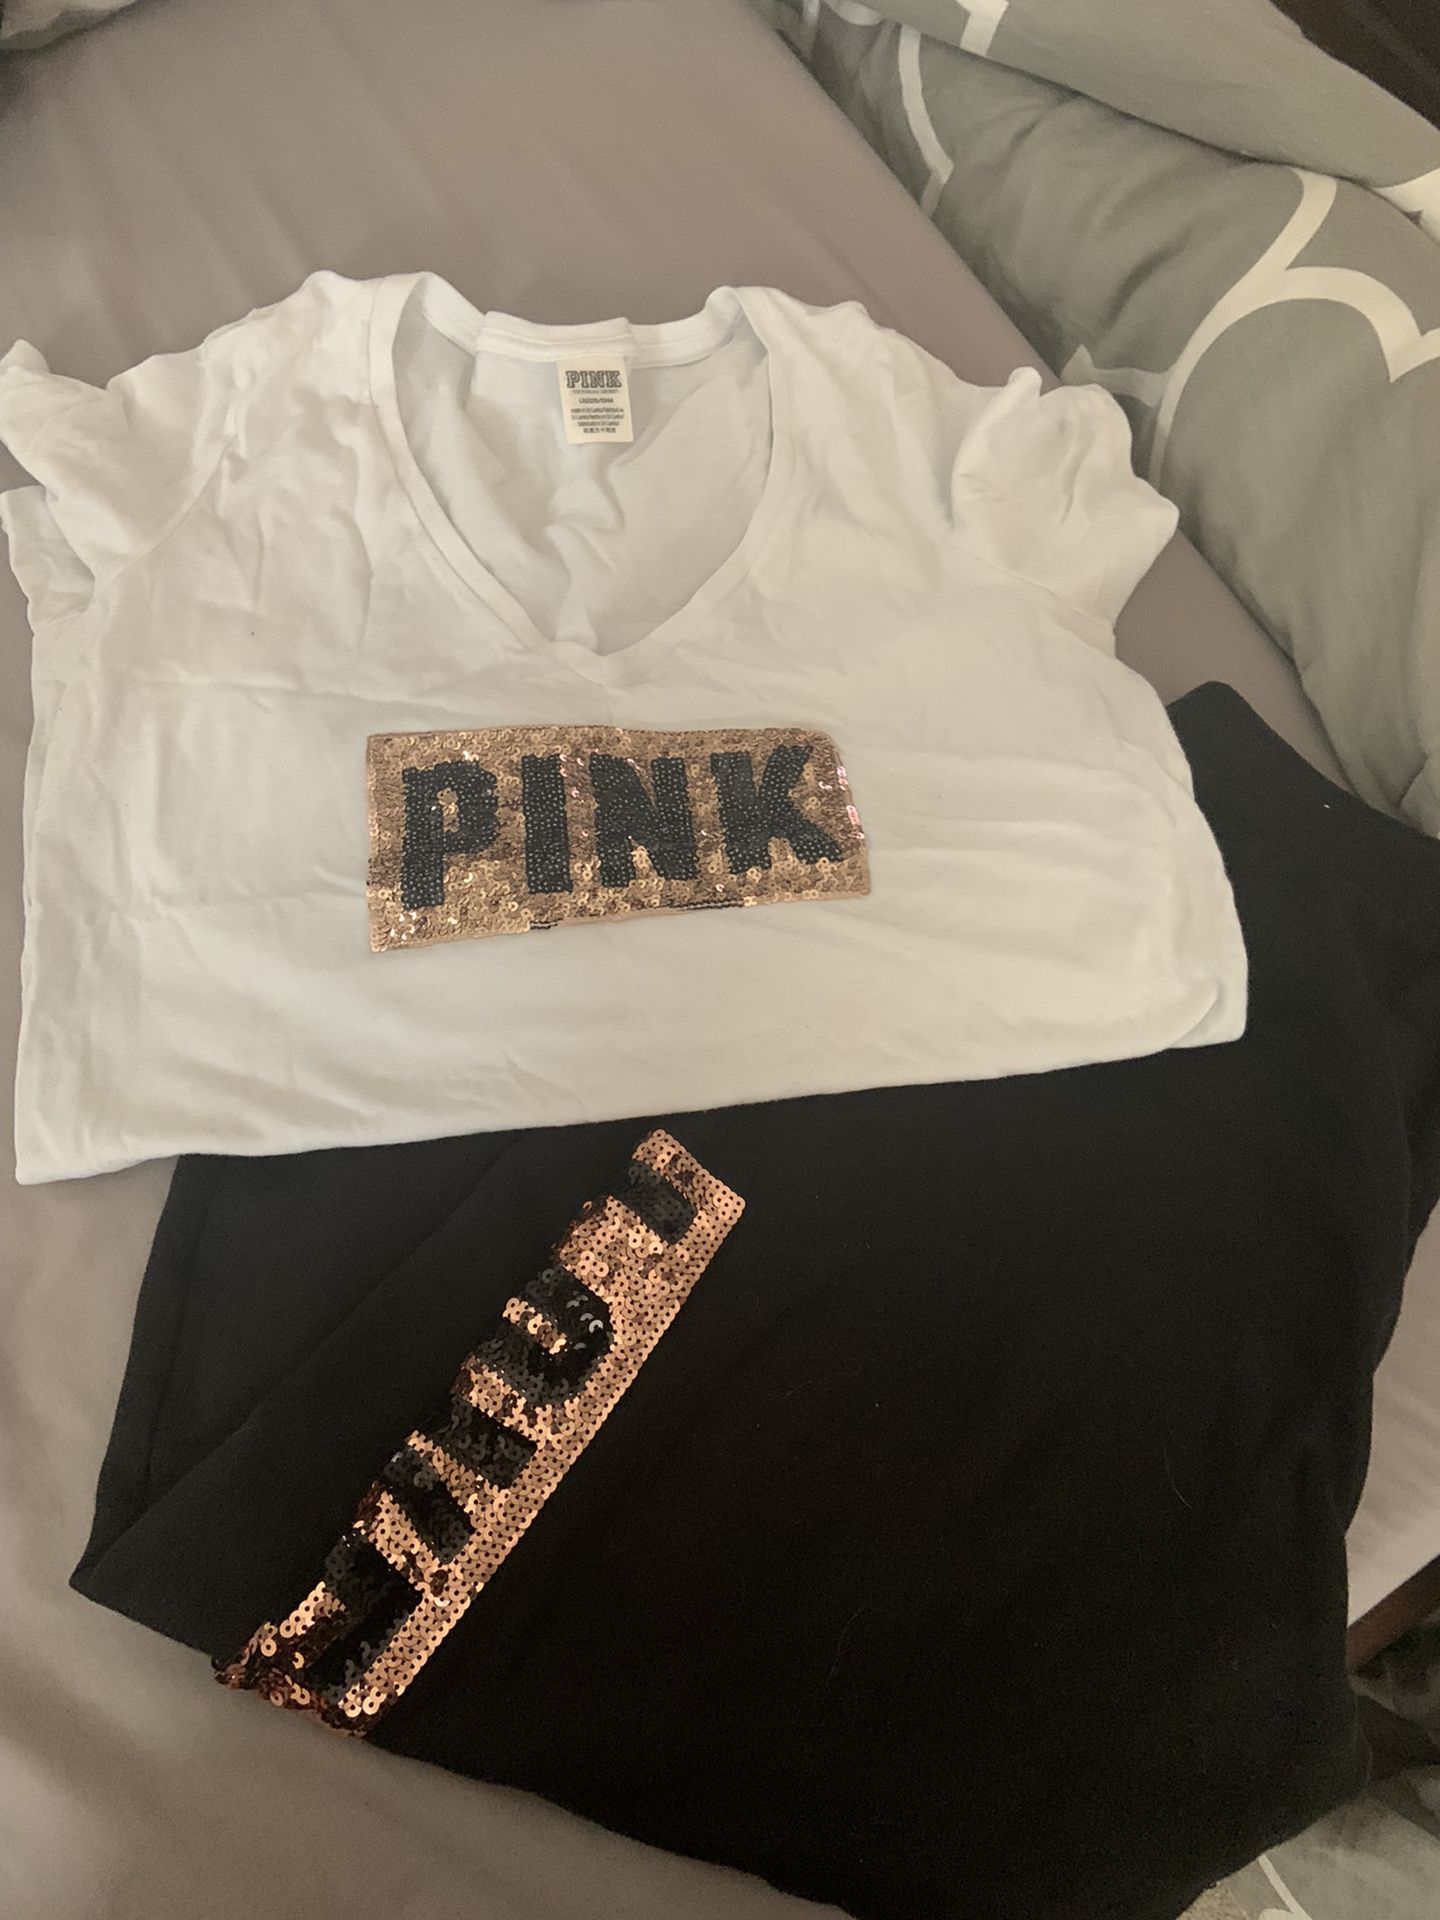 PINK Bling Shirt and Jogger Size L Gently used